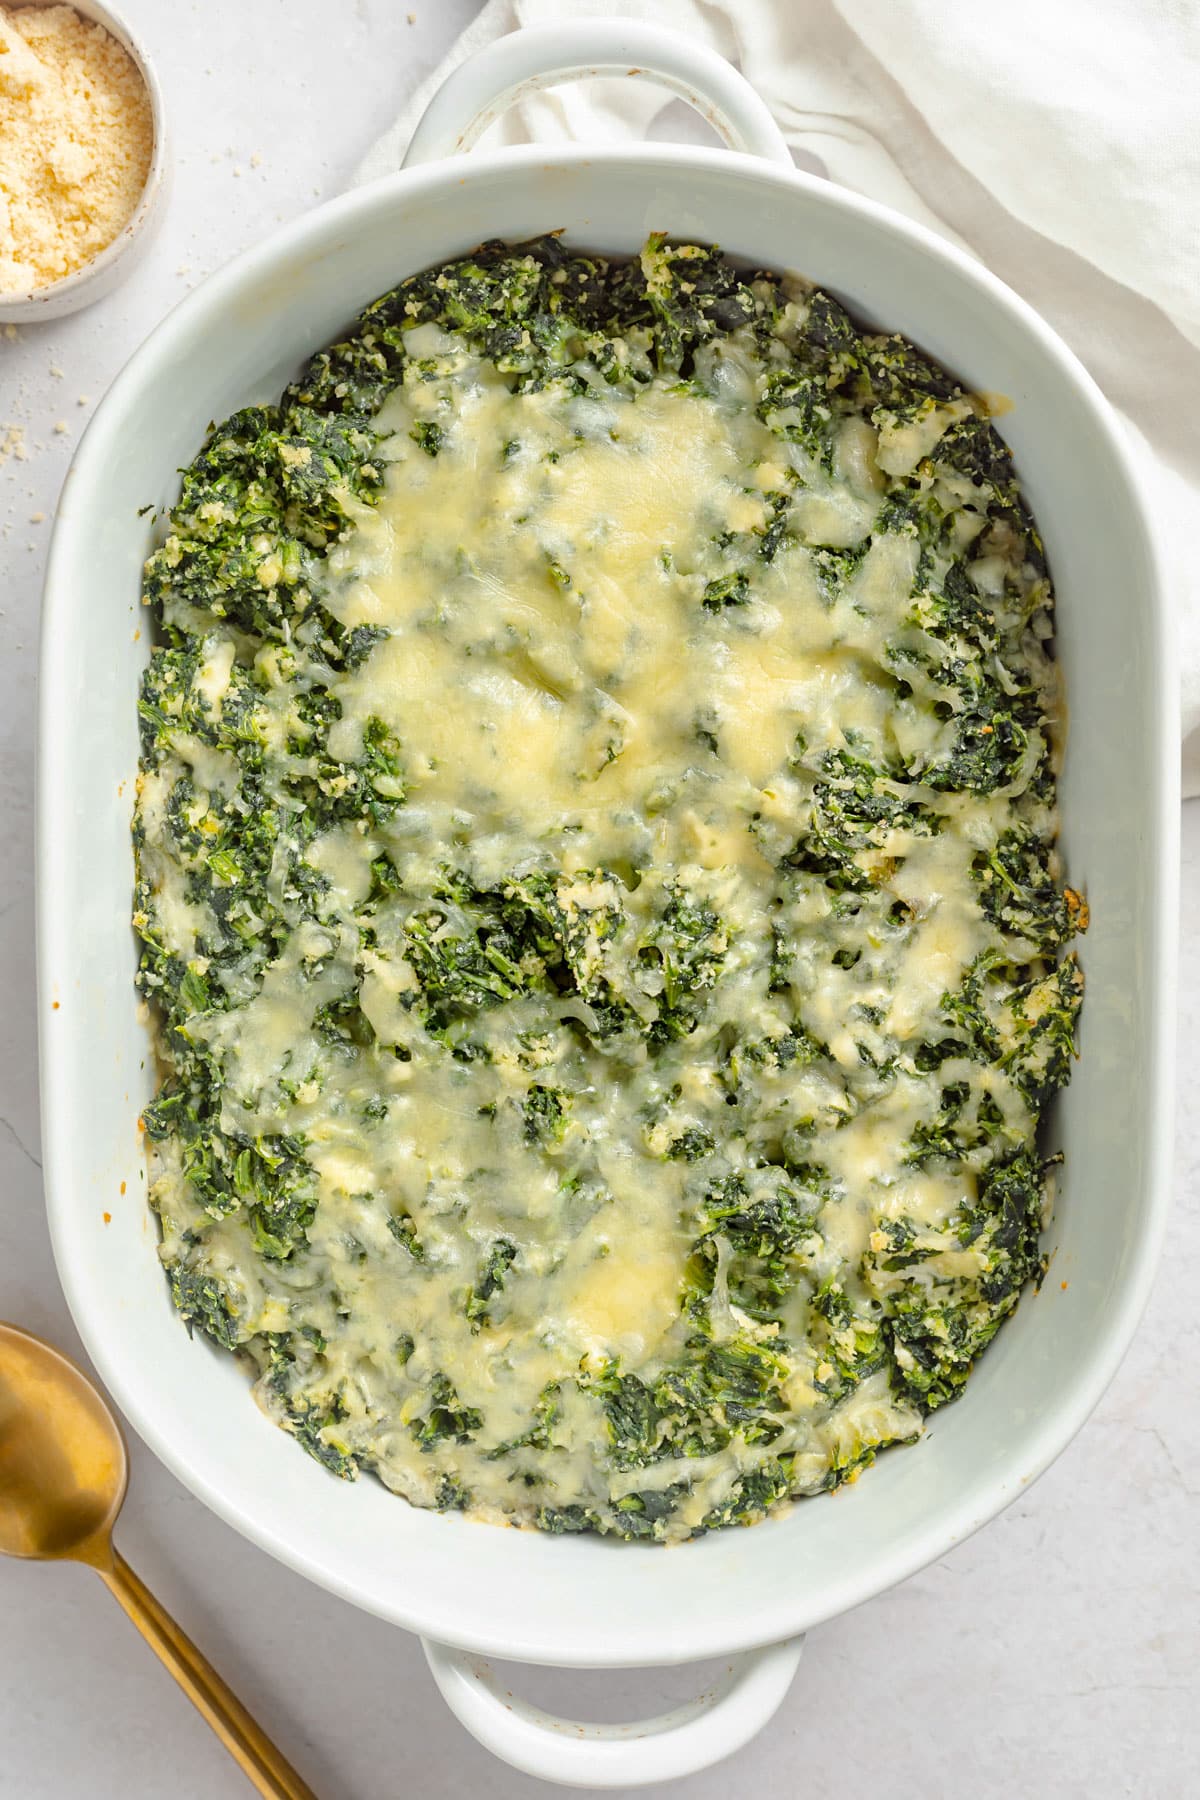 Top-down view of a large oval casserole dish holding a cheesy spinach casserole topped with parmesan.